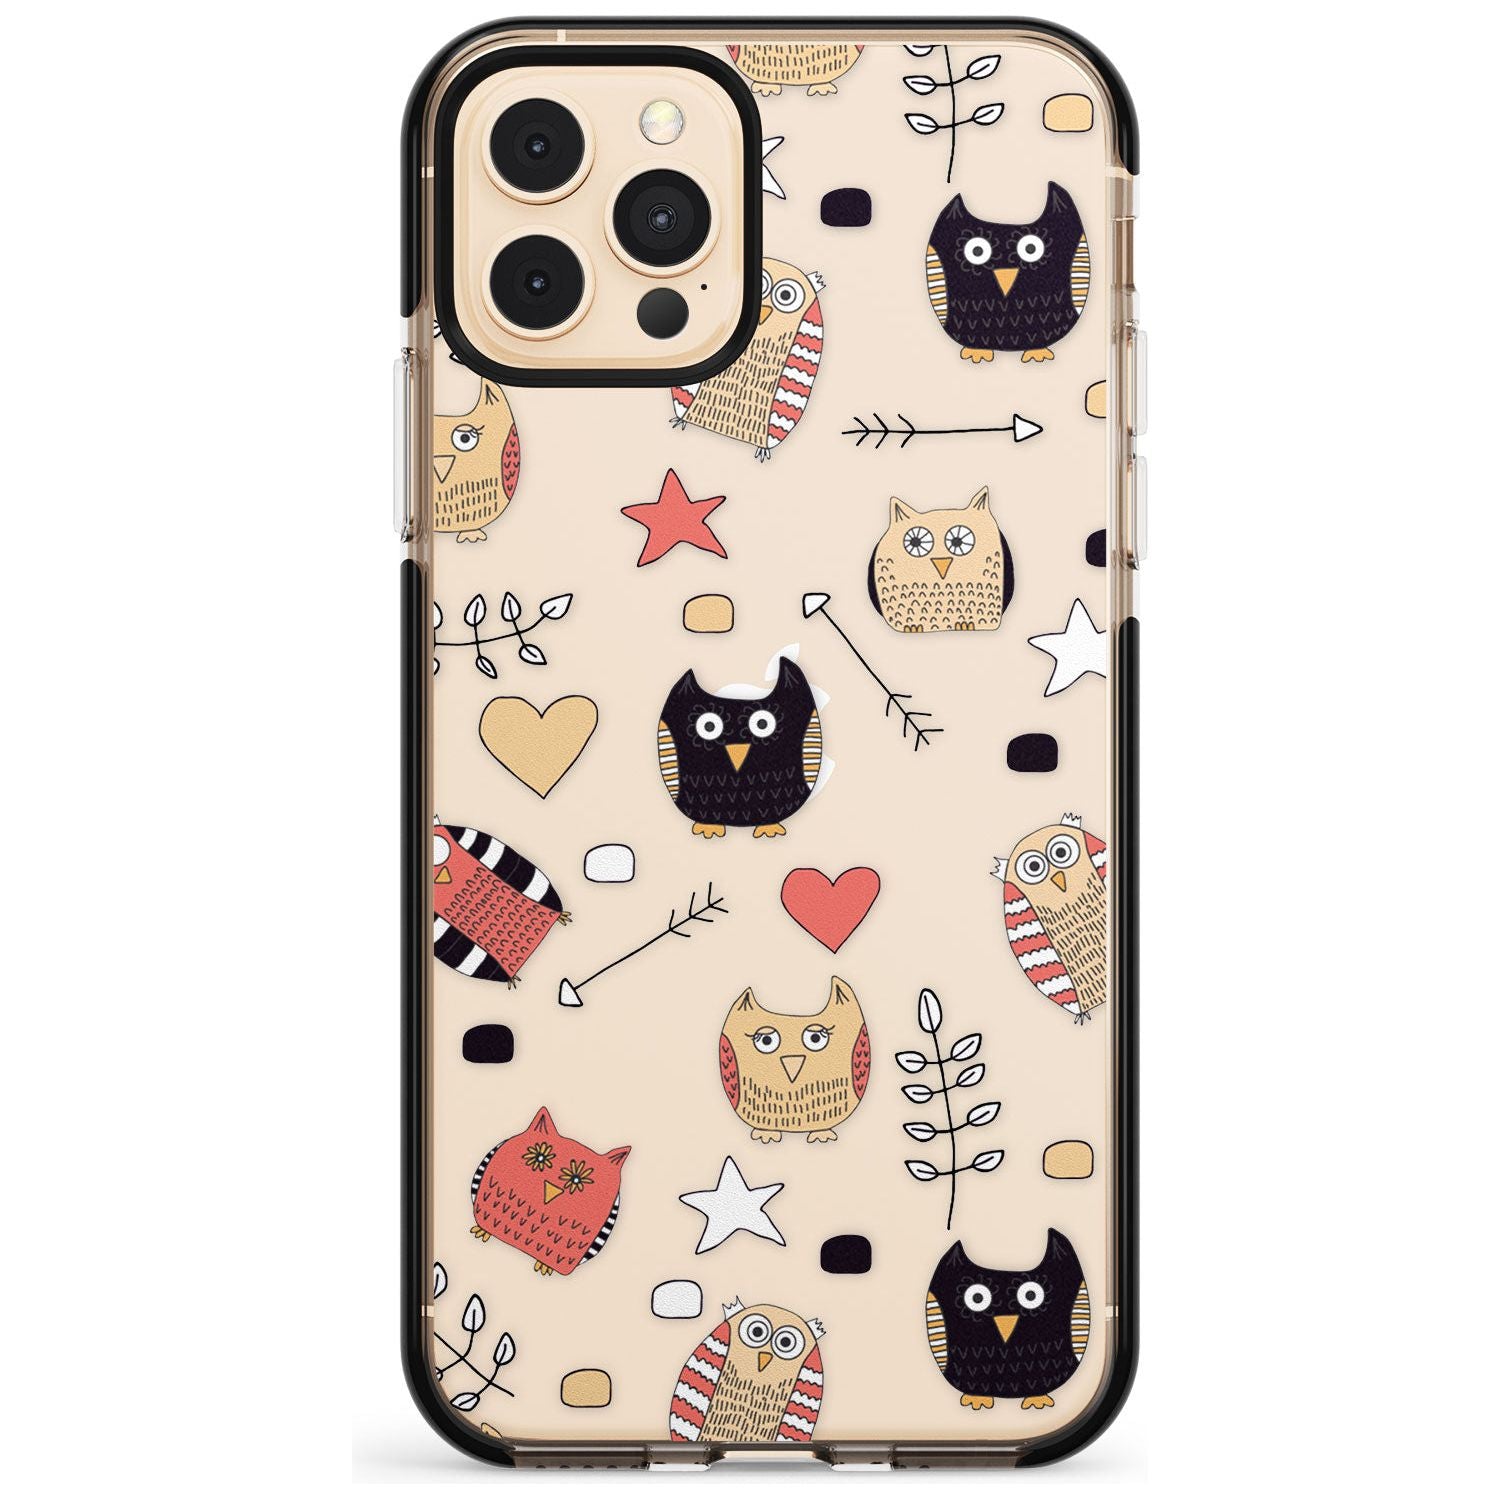 Cute Owl Pattern Black Impact Phone Case for iPhone 11